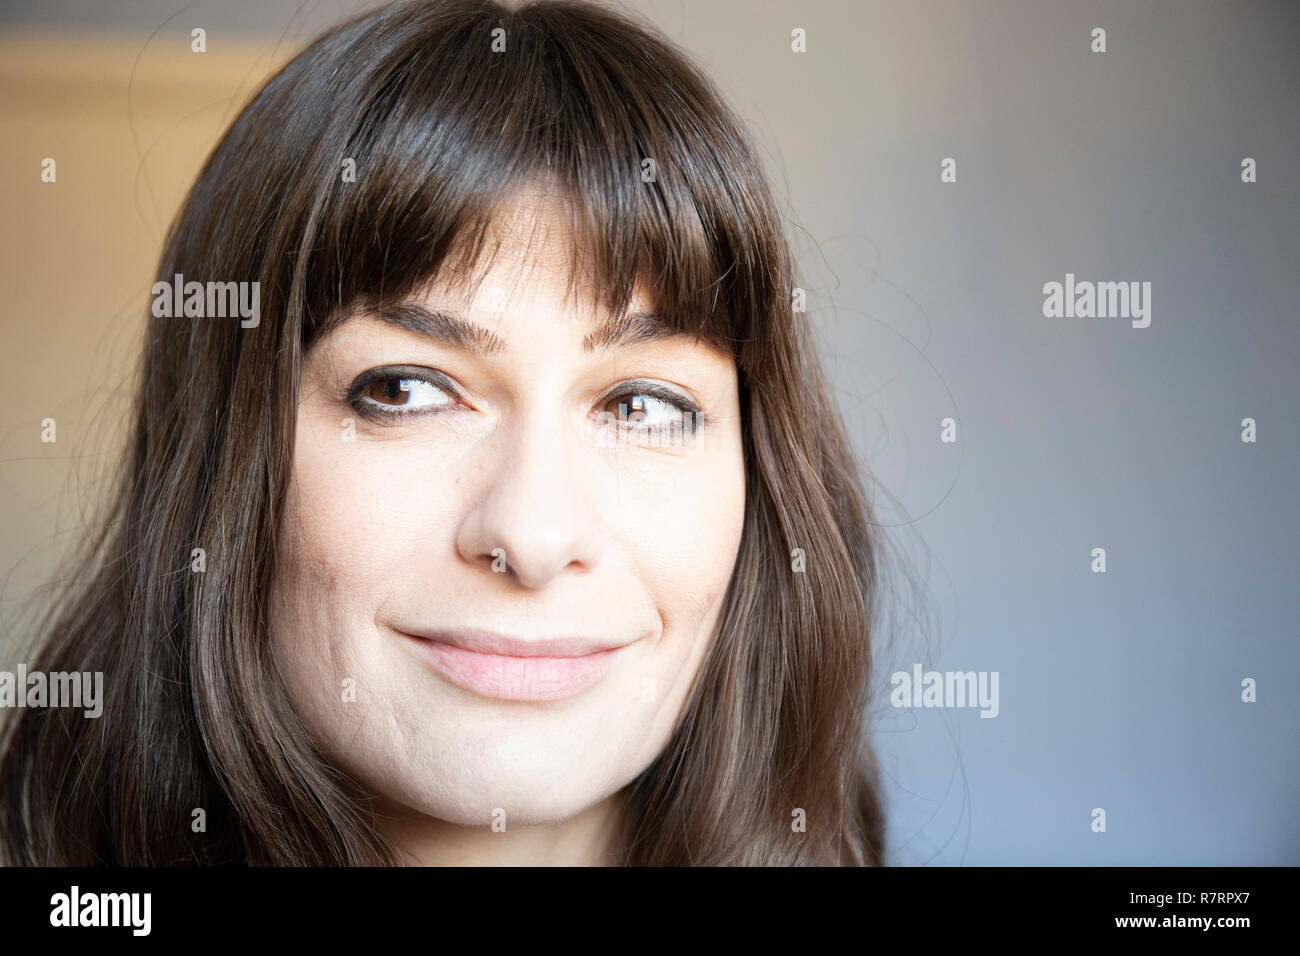 Young woman close-up portrait. Caucasian with brown long hair and bangs. Smiling expression, looking right. Stock Photo